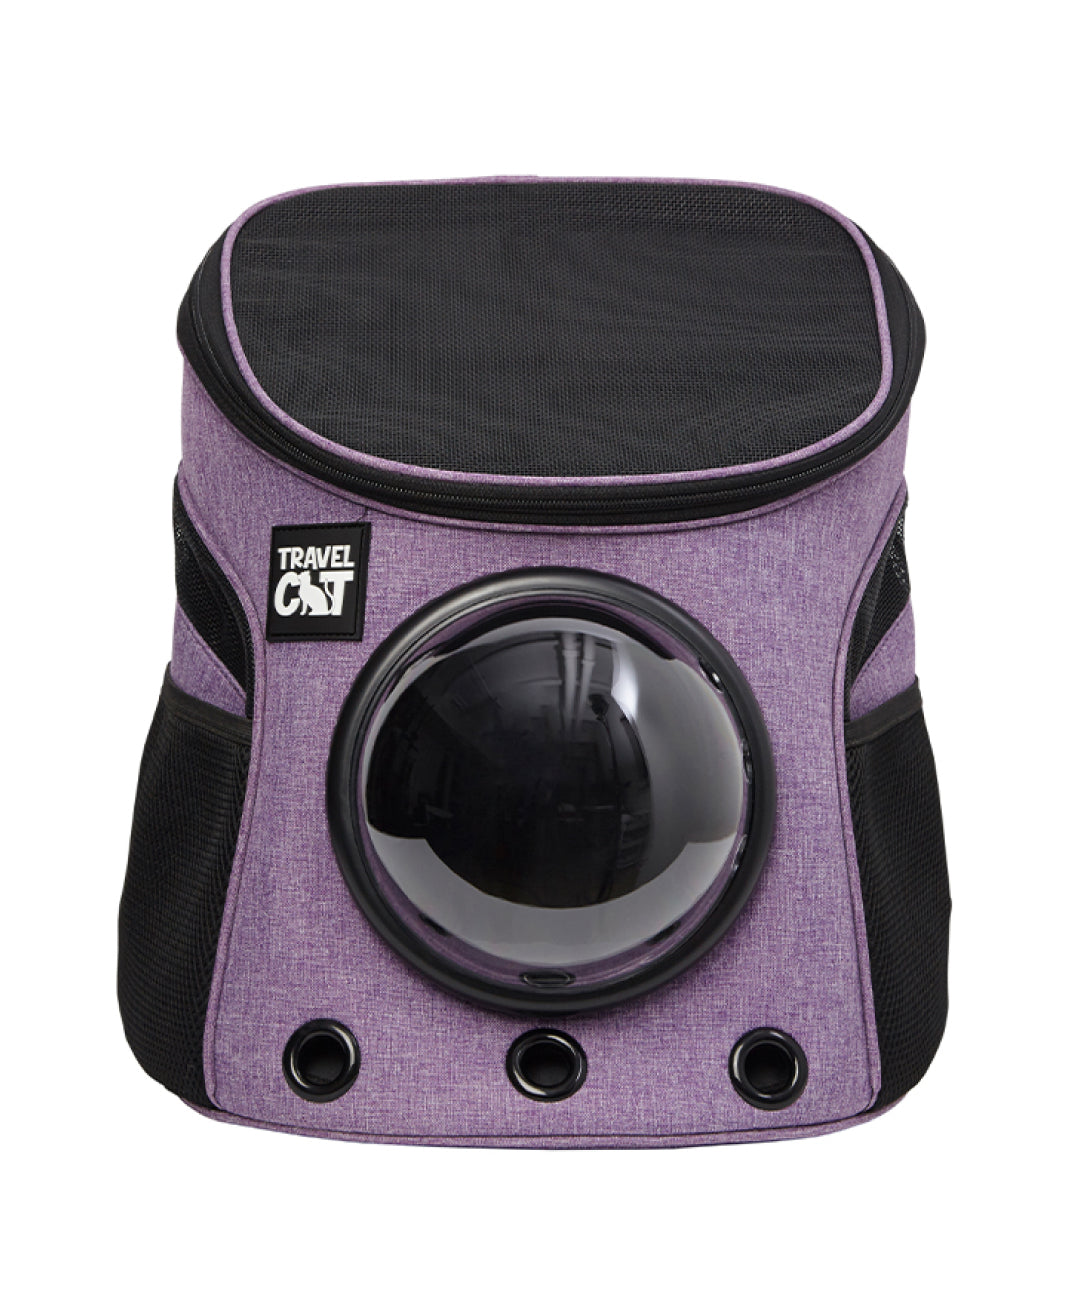 The Fat Cat Mini Bubble Backpack for Small Cats Pet Carriers & Crates Travel Cat Purple 